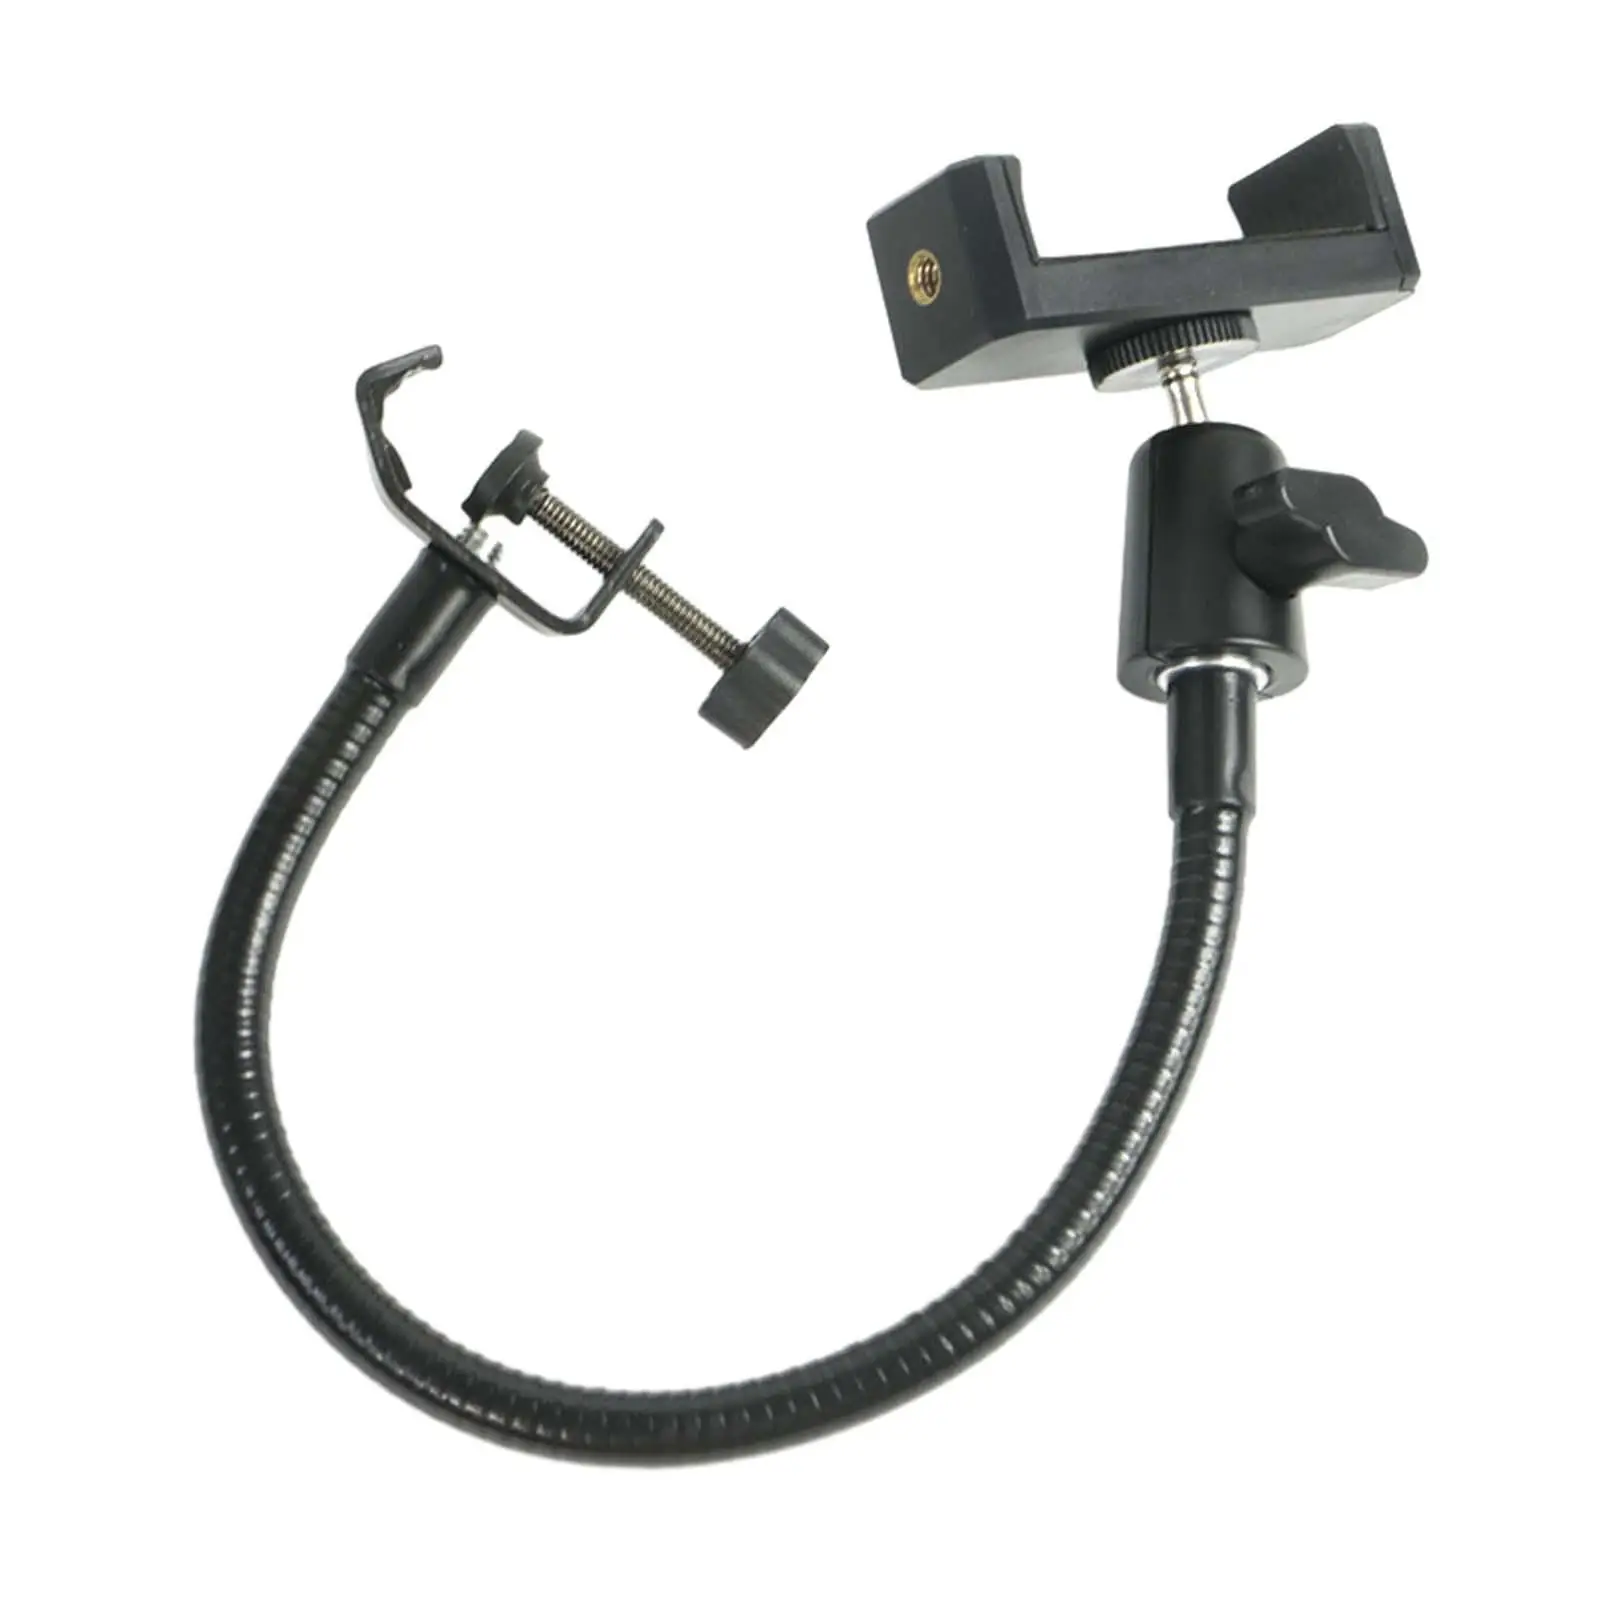 Phone Stand Portable Flexible Long Range Mic Stands Holder with Clip for Meeting Singing Live Broadcast Speech Supplies